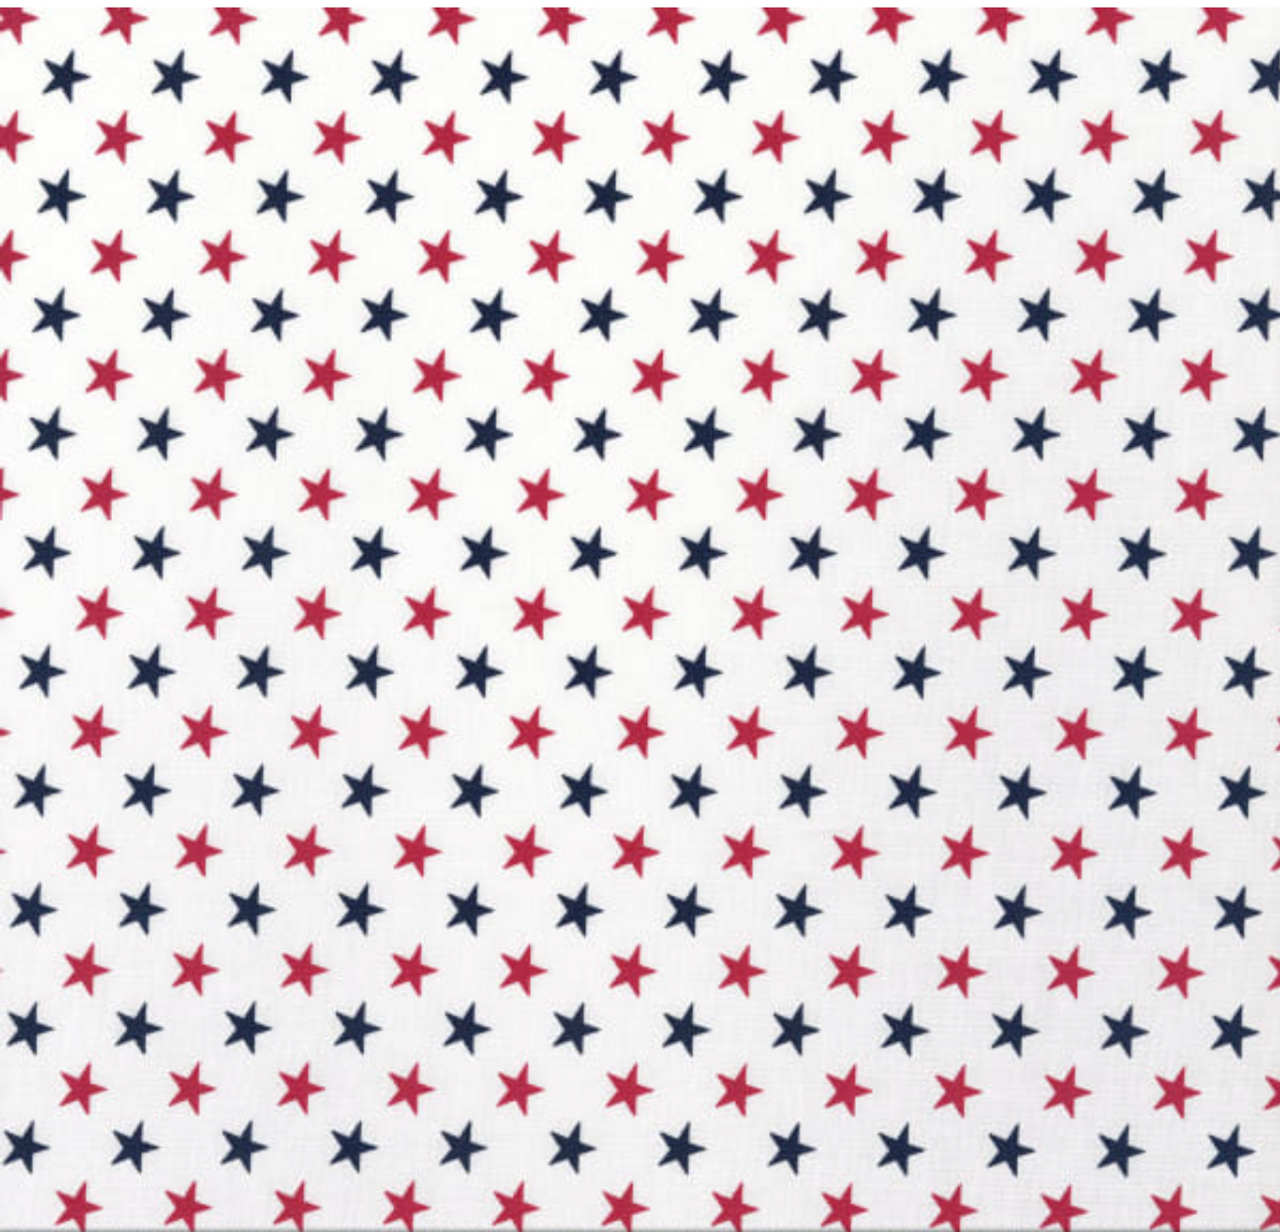 Henry Glass One Nation Set Stars Multi Fabric By The Yard